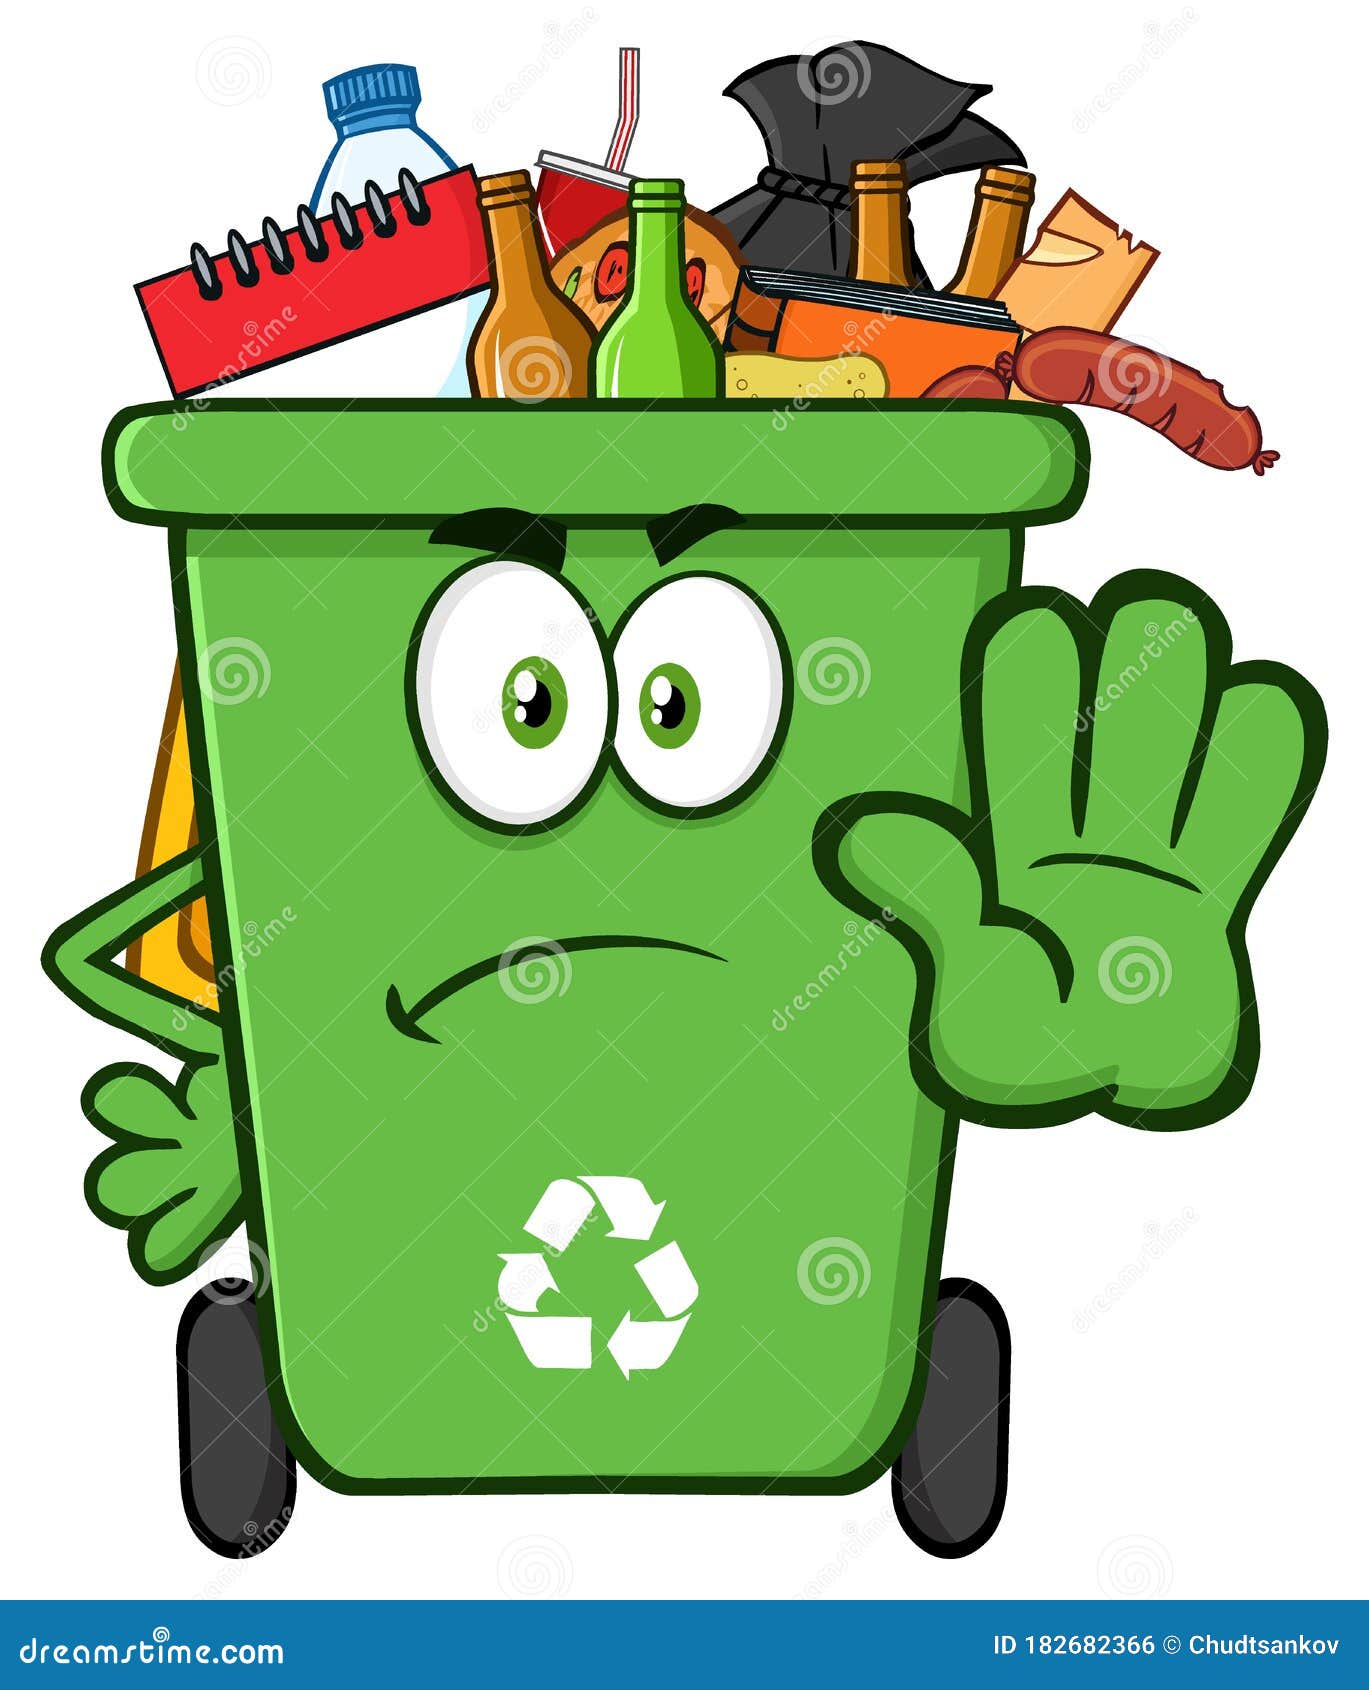 https://thumbs.dreamstime.com/z/angry-green-recycle-bin-cartoon-mascot-character-full-garbage-gesturing-stop-vector-illustration-isolated-white-background-182682366.jpg